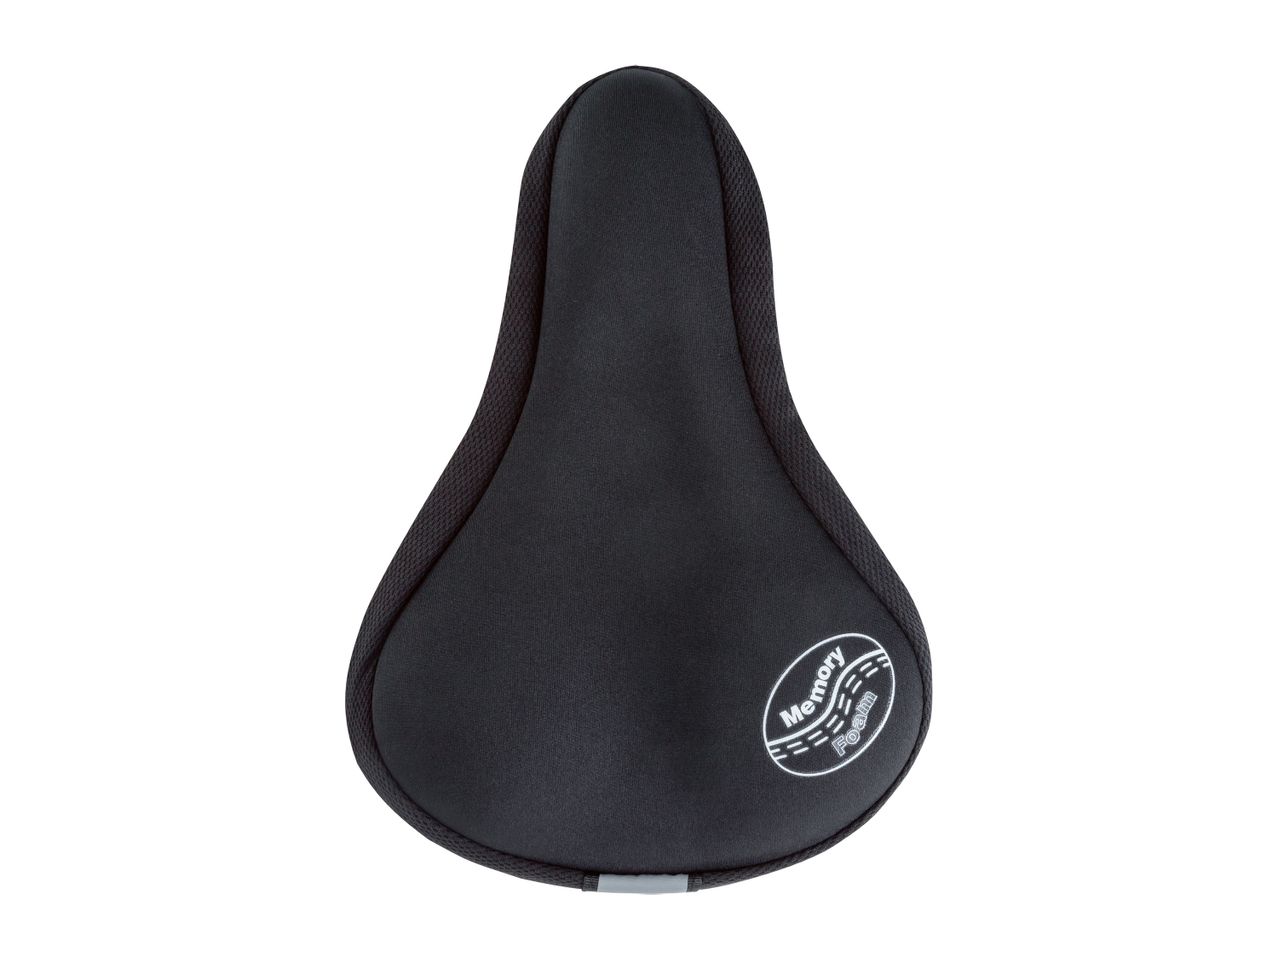 Go to full screen view: Crivit Saddle Cover With Memory Foam - Image 2